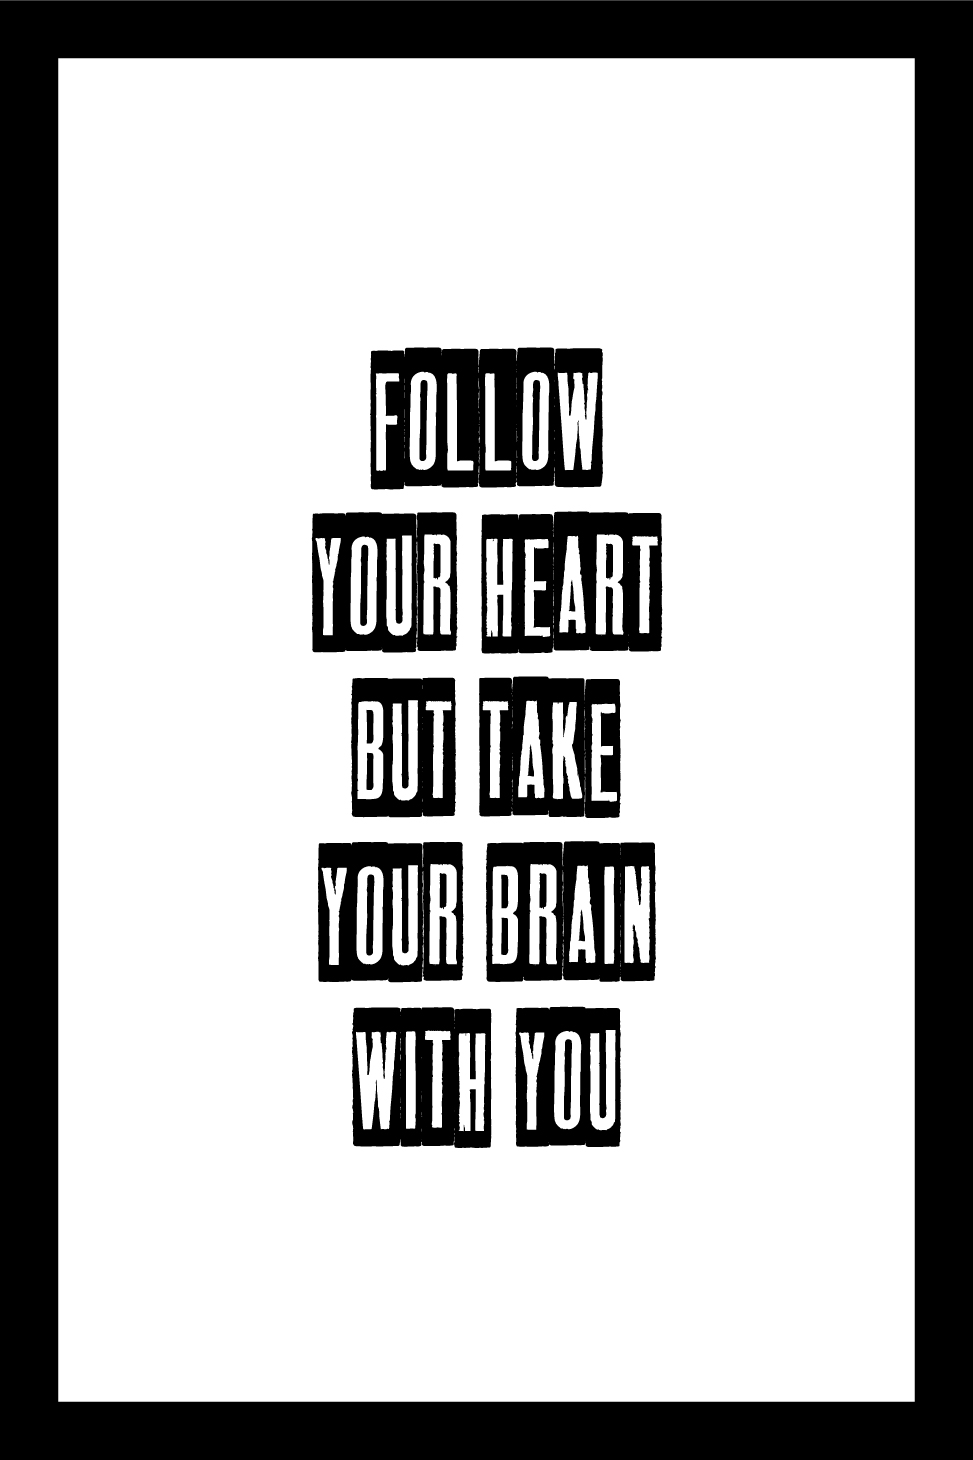 follow your heart but take your brain with you